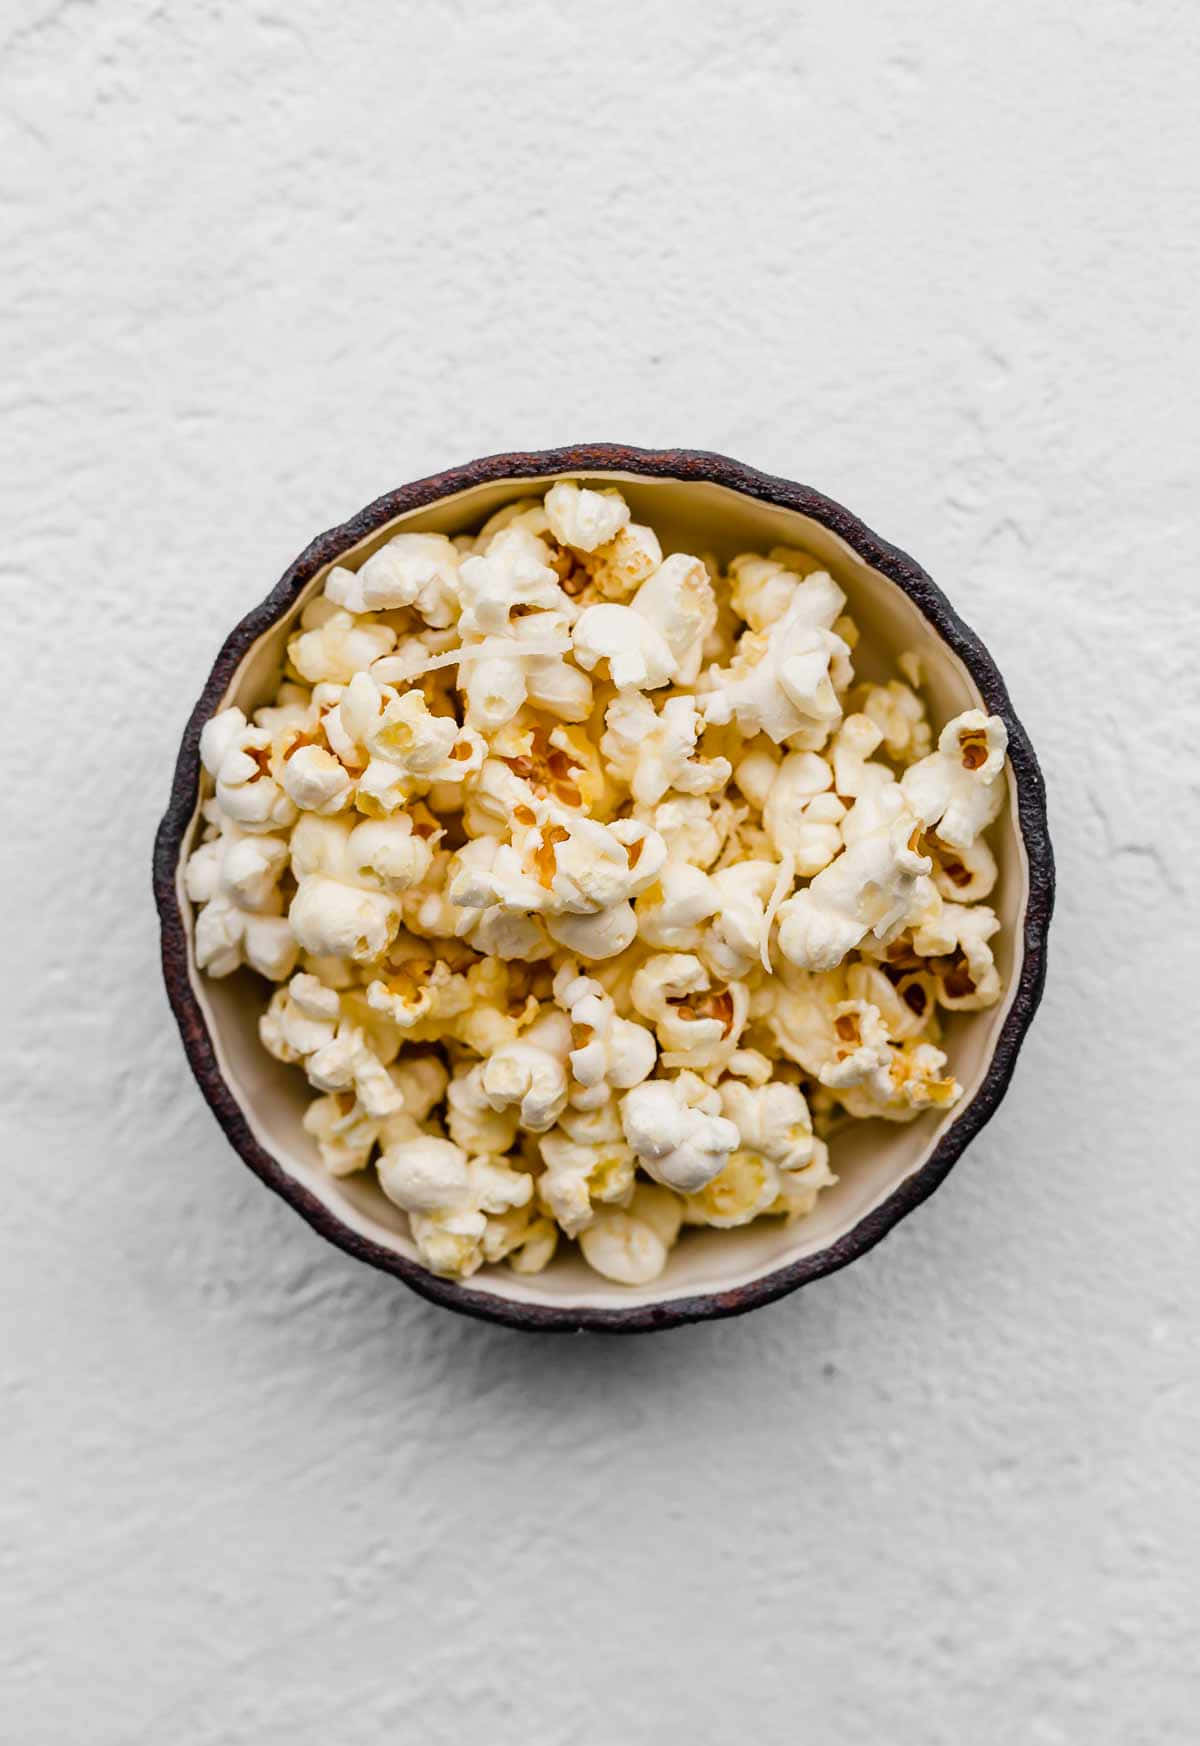 A Bowl Of Popcorn On A White Background